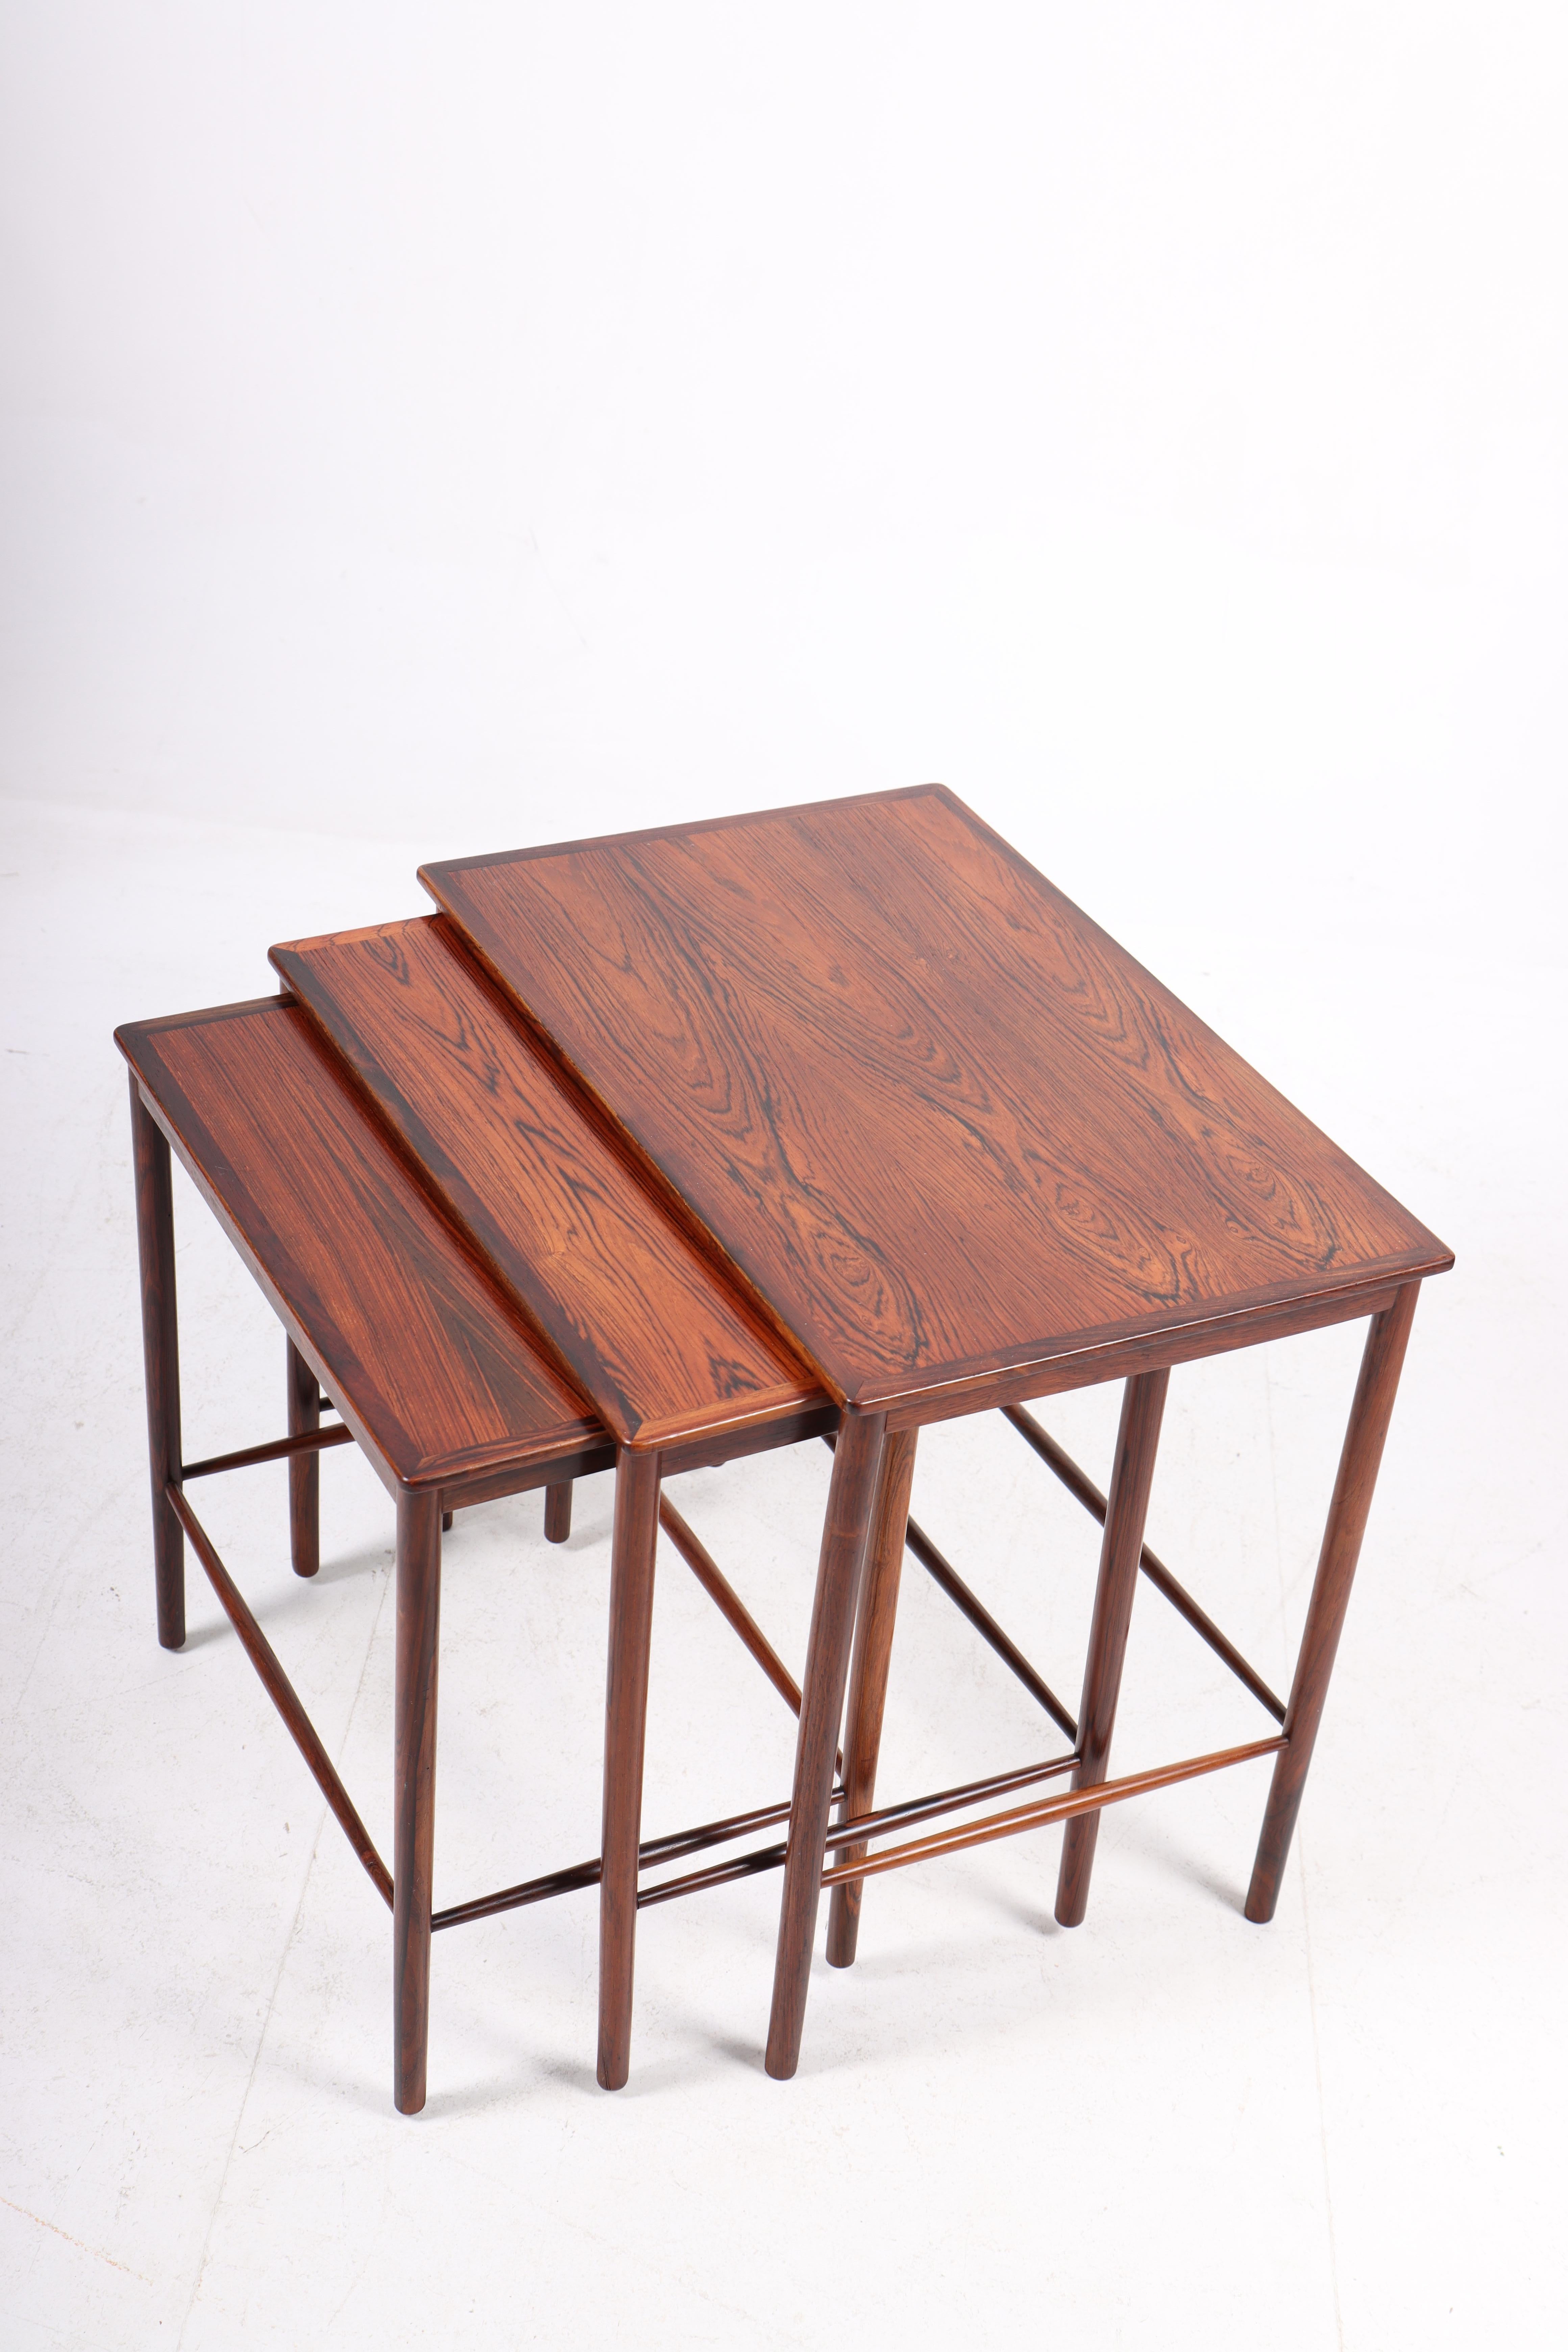 Midcentury Nesting Table in Rosewood Designed by Grethe Jalk, 1950s In Good Condition For Sale In Lejre, DK